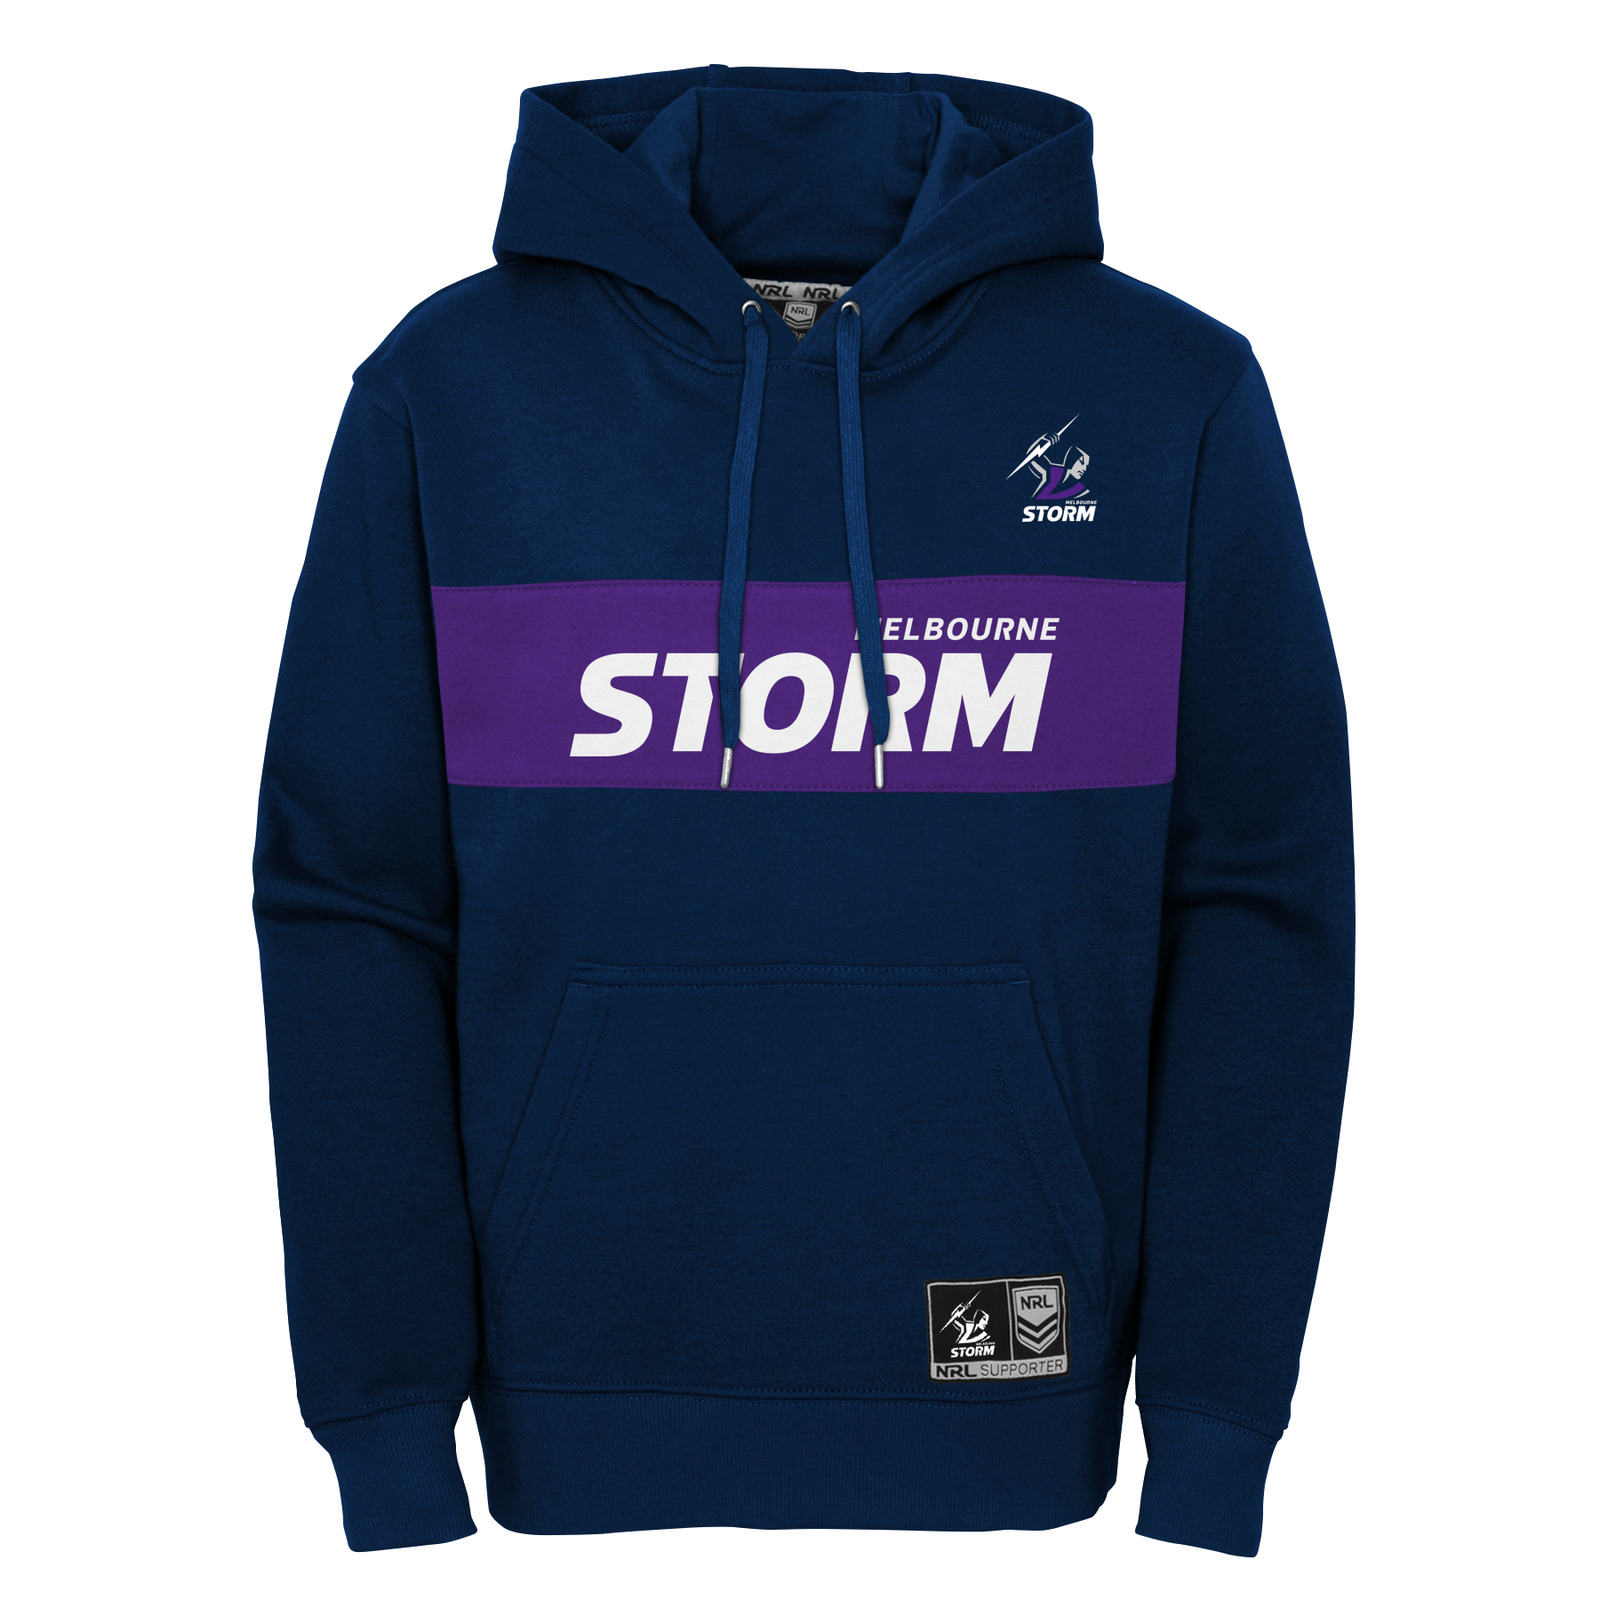 Details about   Melbourne Storm NRL 2020 Players ISC Tech Pro Hoody Jacket Sizes S-5XL! 